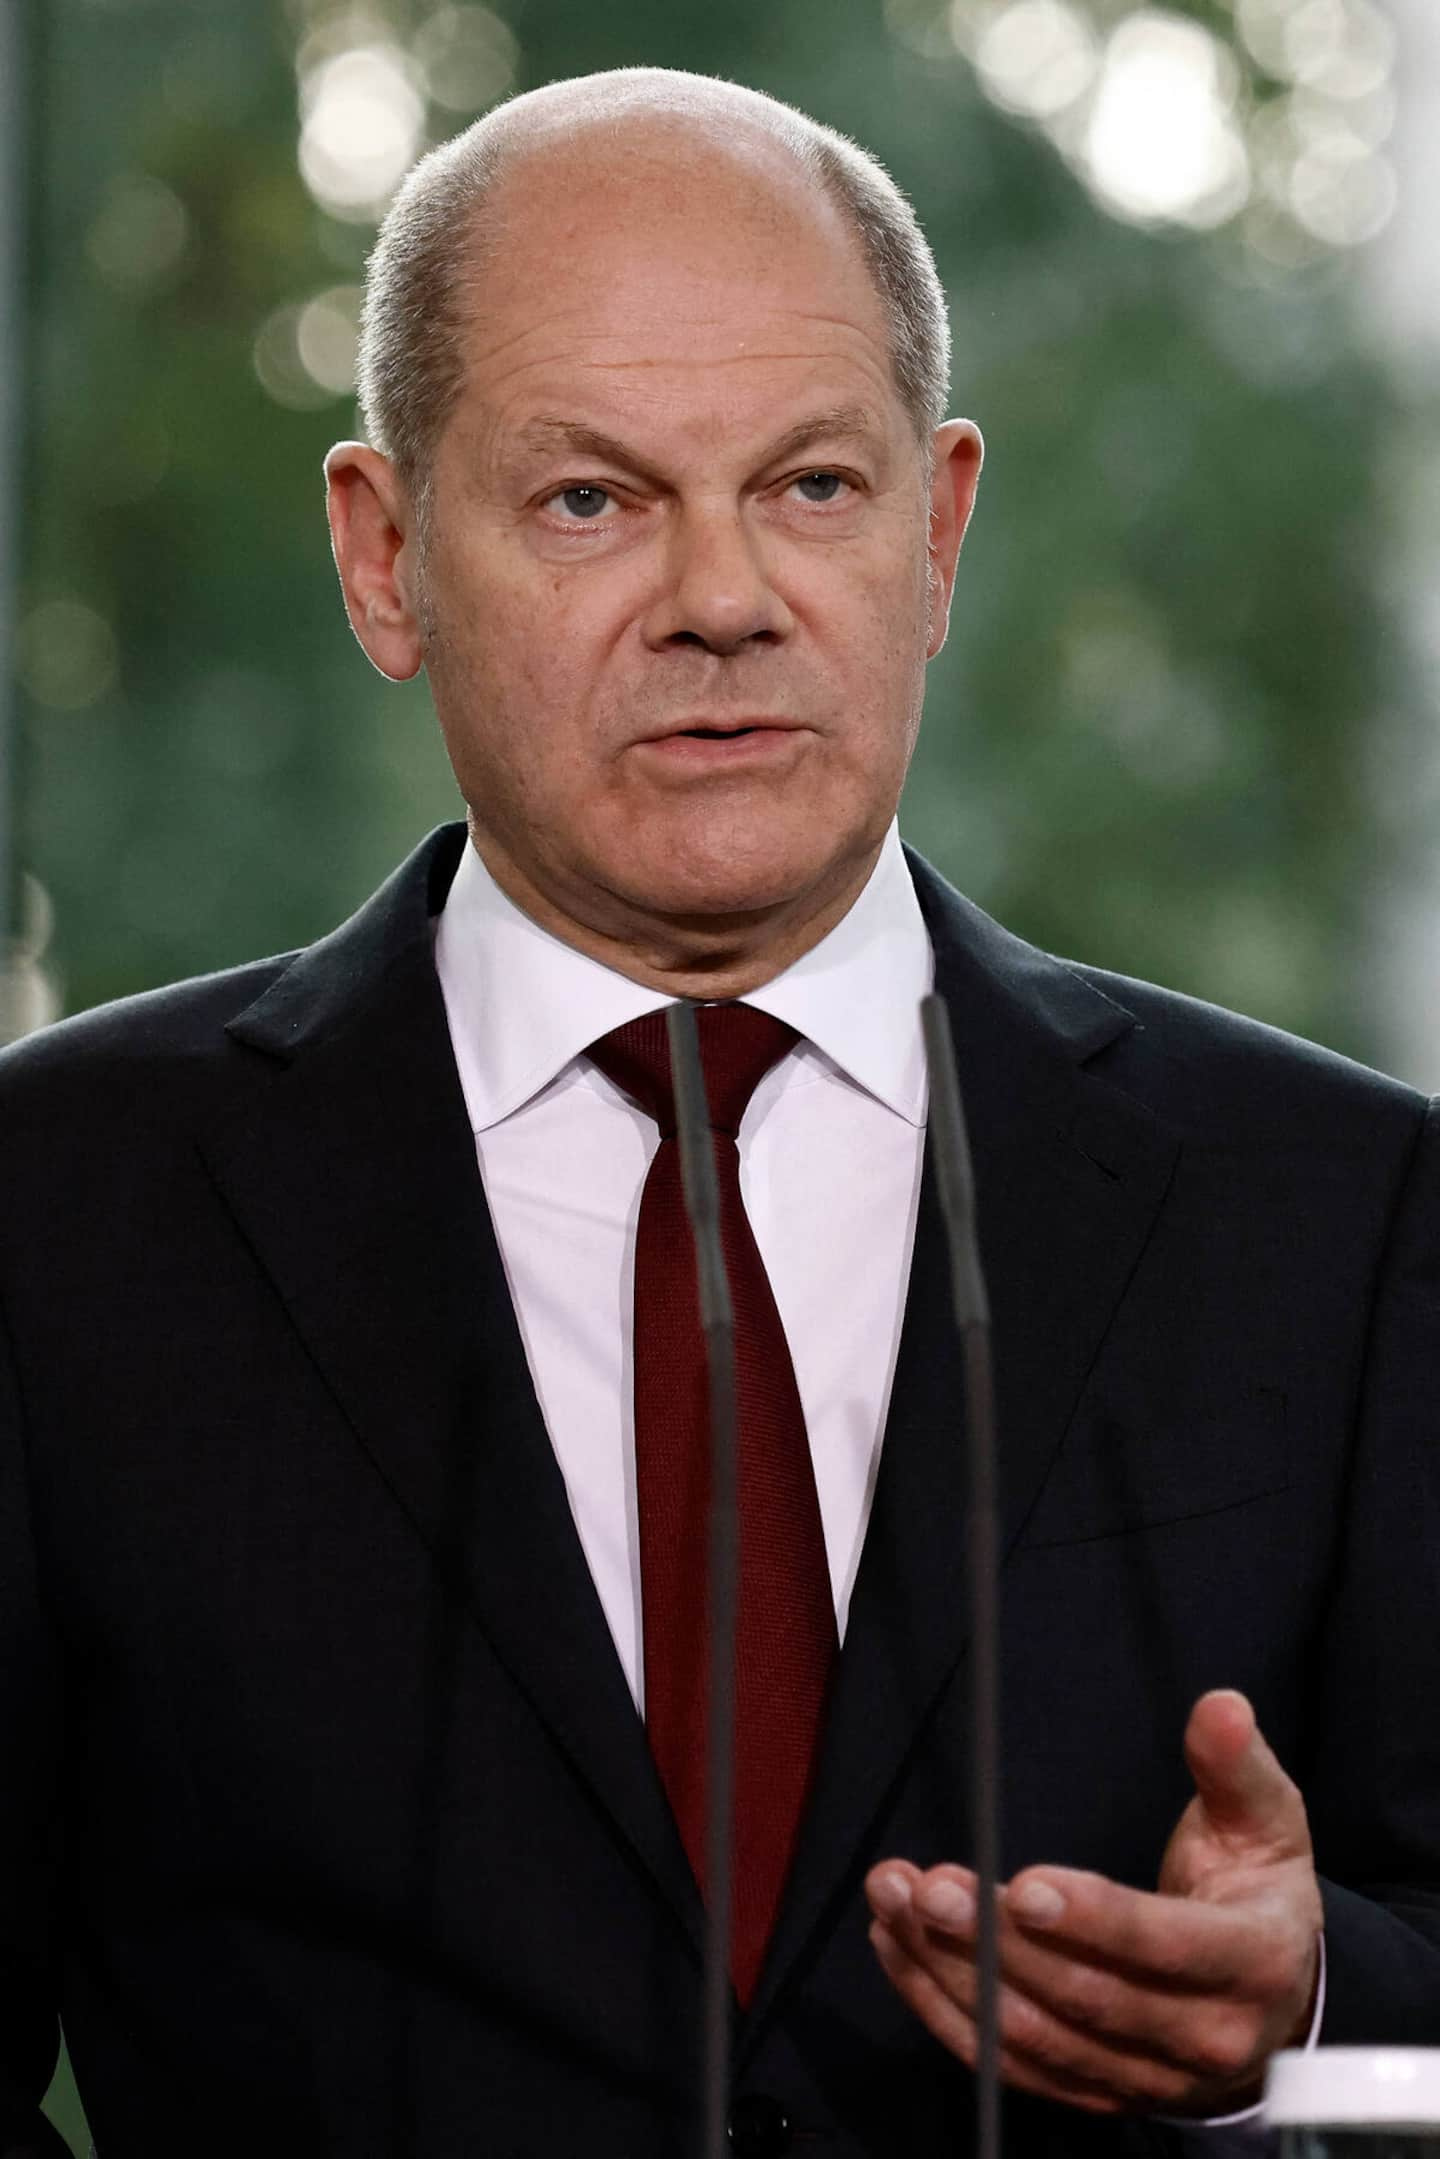 'Dirty bomb': Scholz rejects Russia's accusations against Ukraine